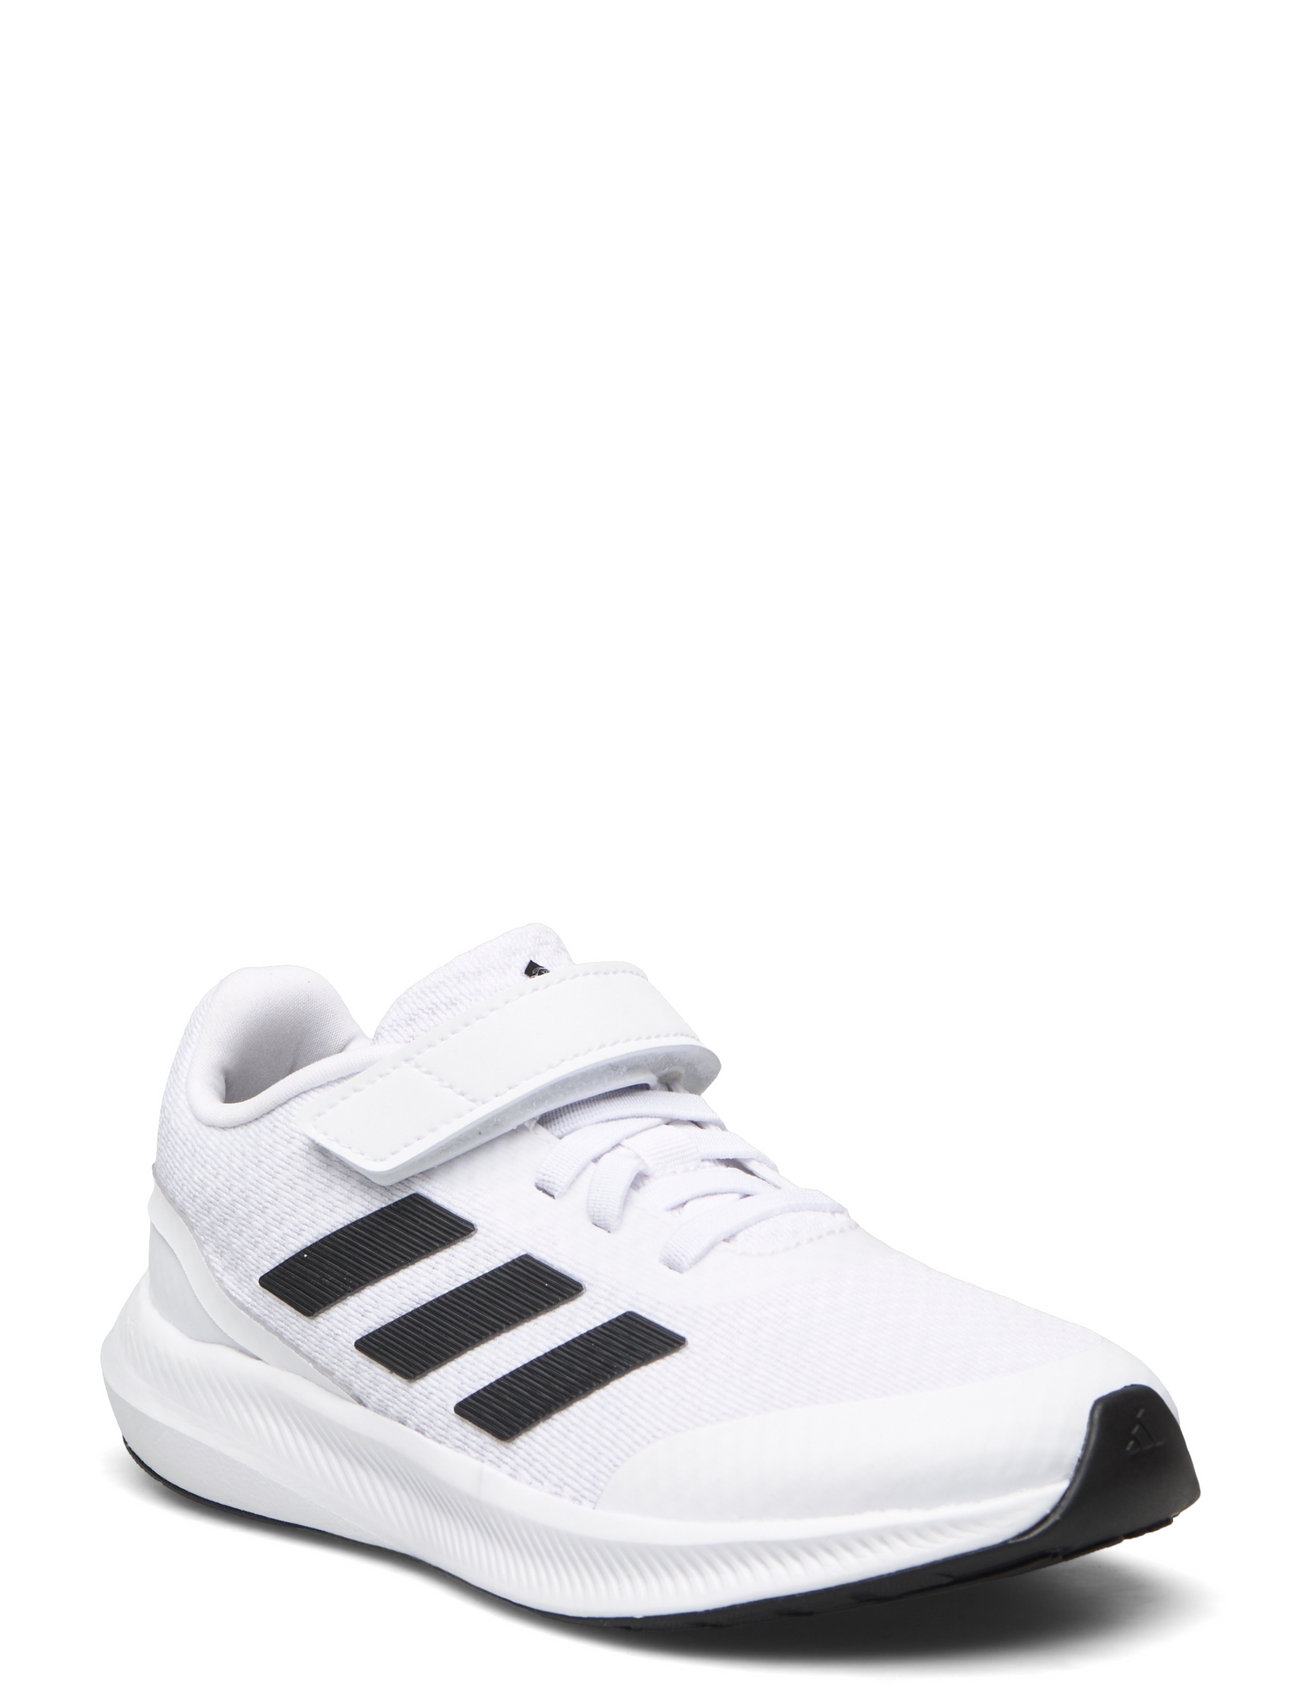 Performance Lace Shoes Sneakers Strap - Top 3.0 Runfalcon adidas Elastic